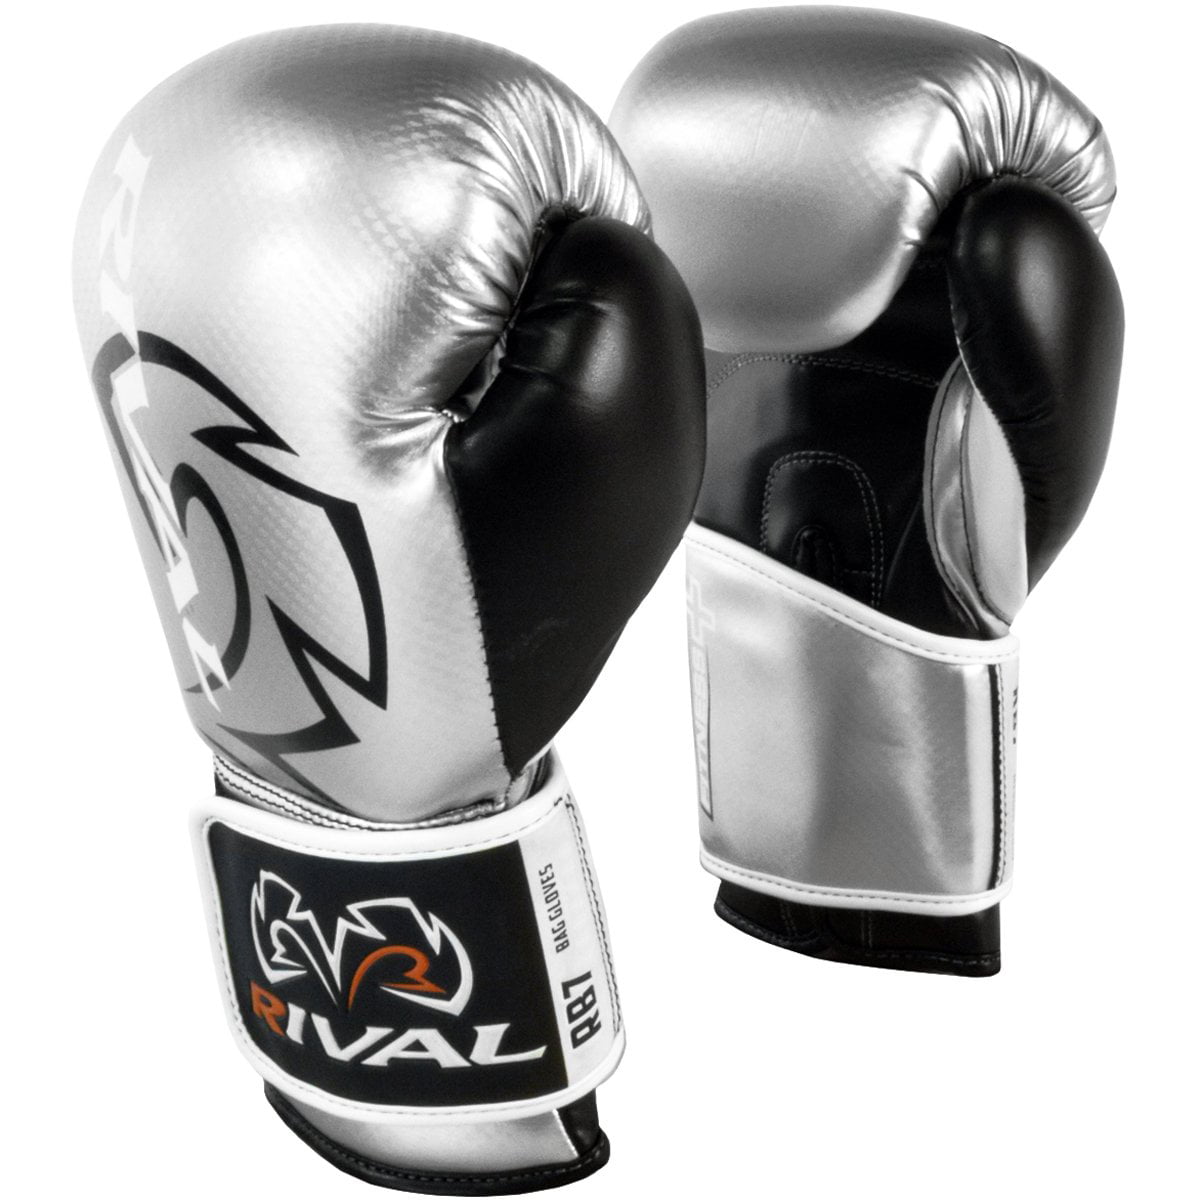 Rival Boxing Bag Gloves RB7 Fitness Plus Training Silver Black 